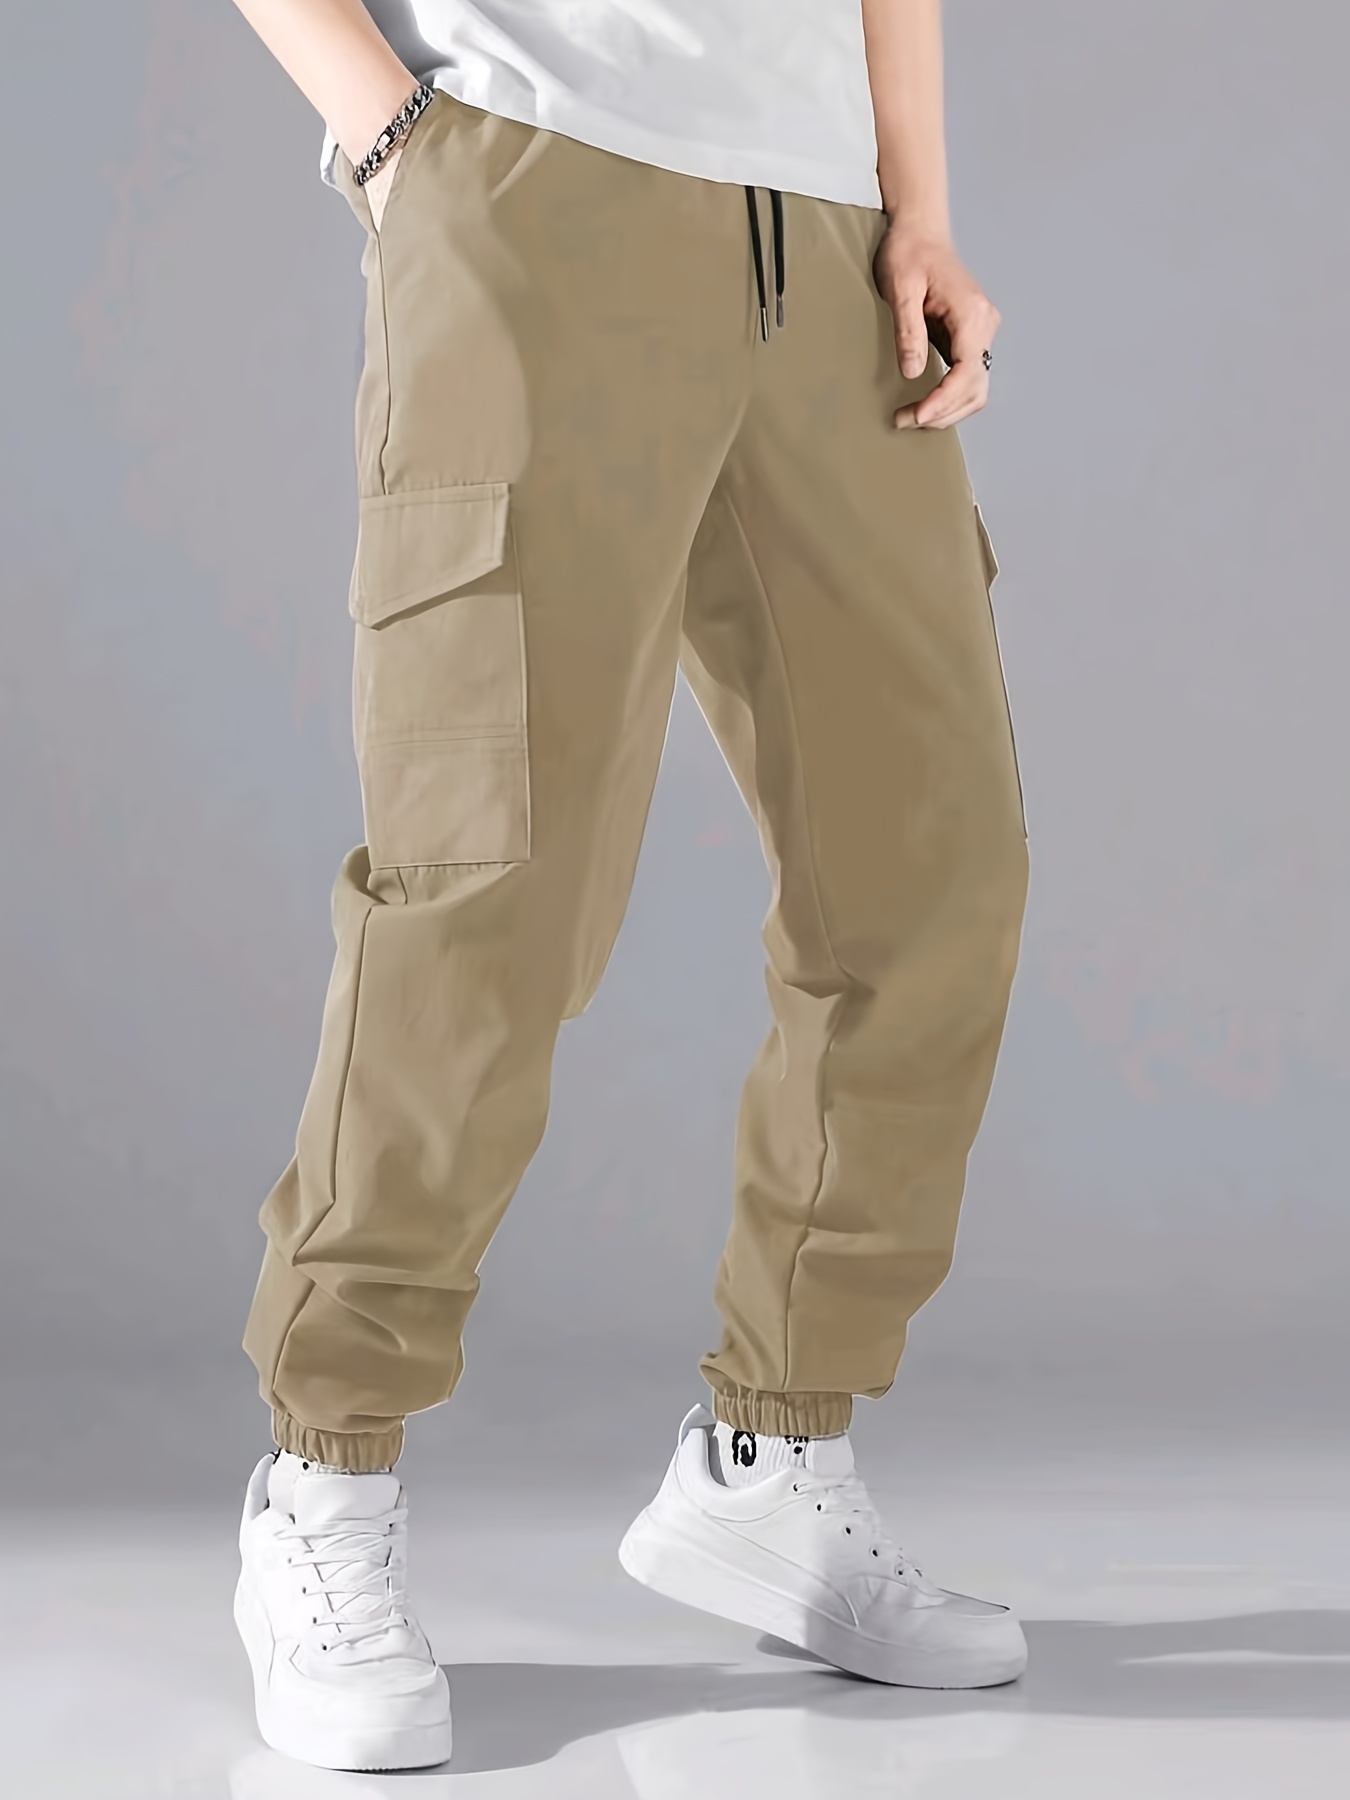 FOCUSNORM Men Solid Color Cargo Trousers, Loose Fit Drawstring